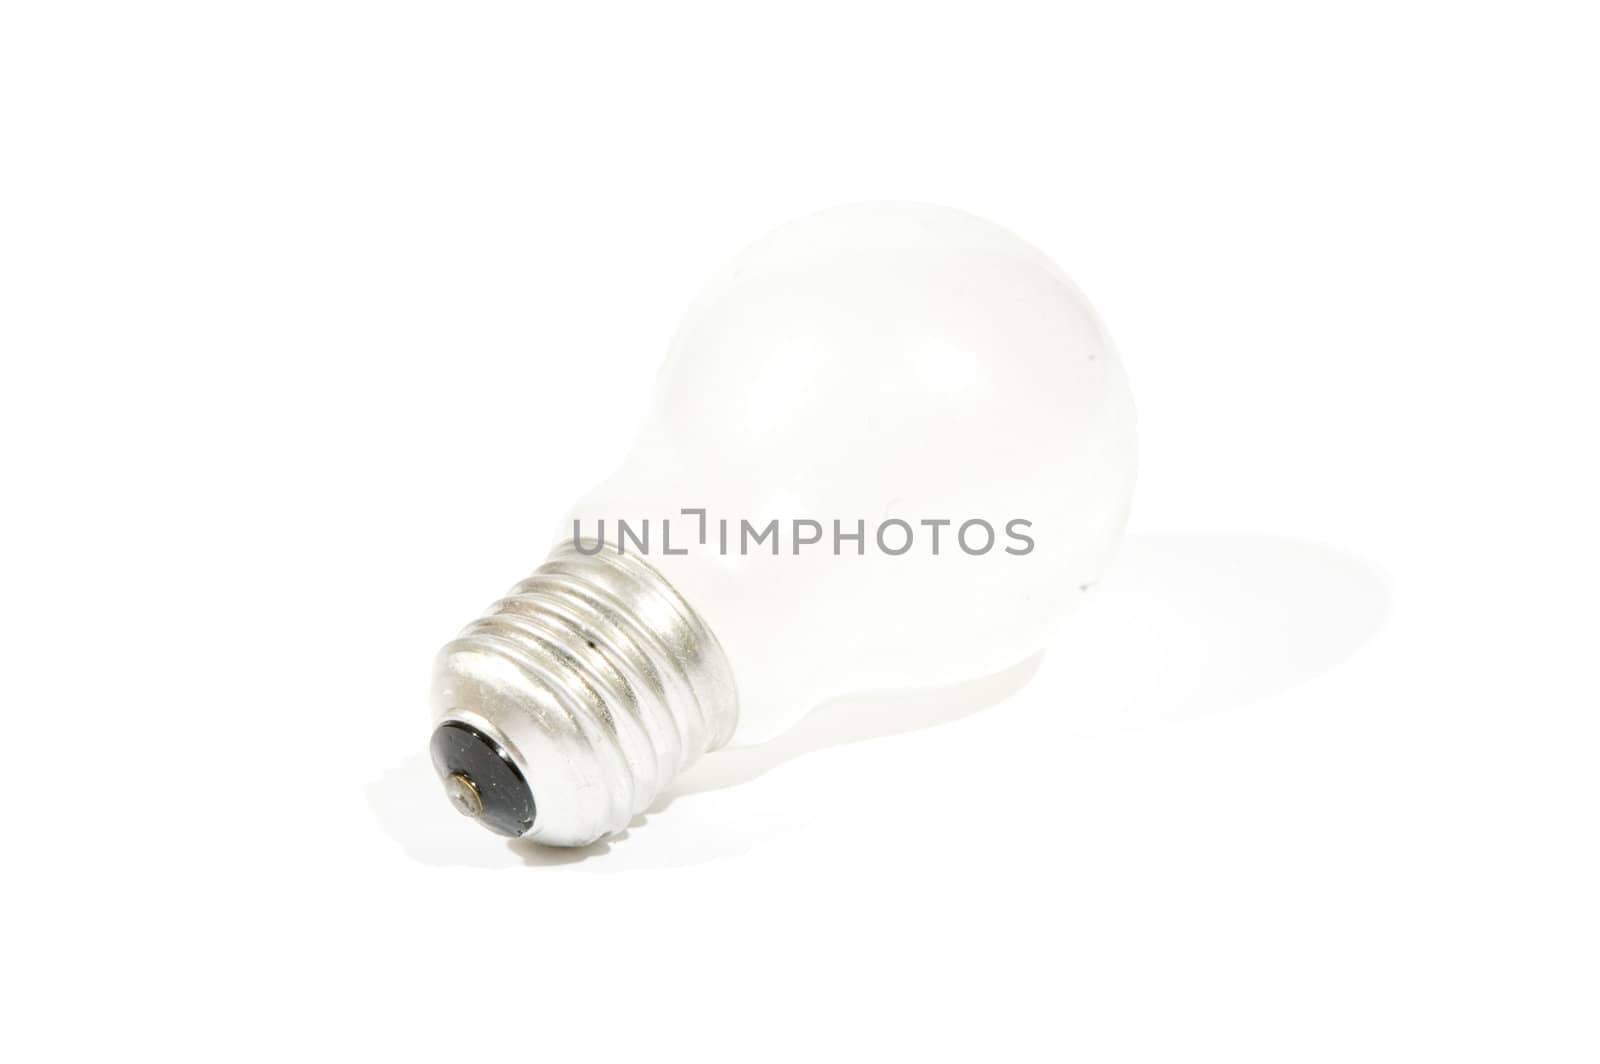 High-quality lightbulb with shadow isolated on white